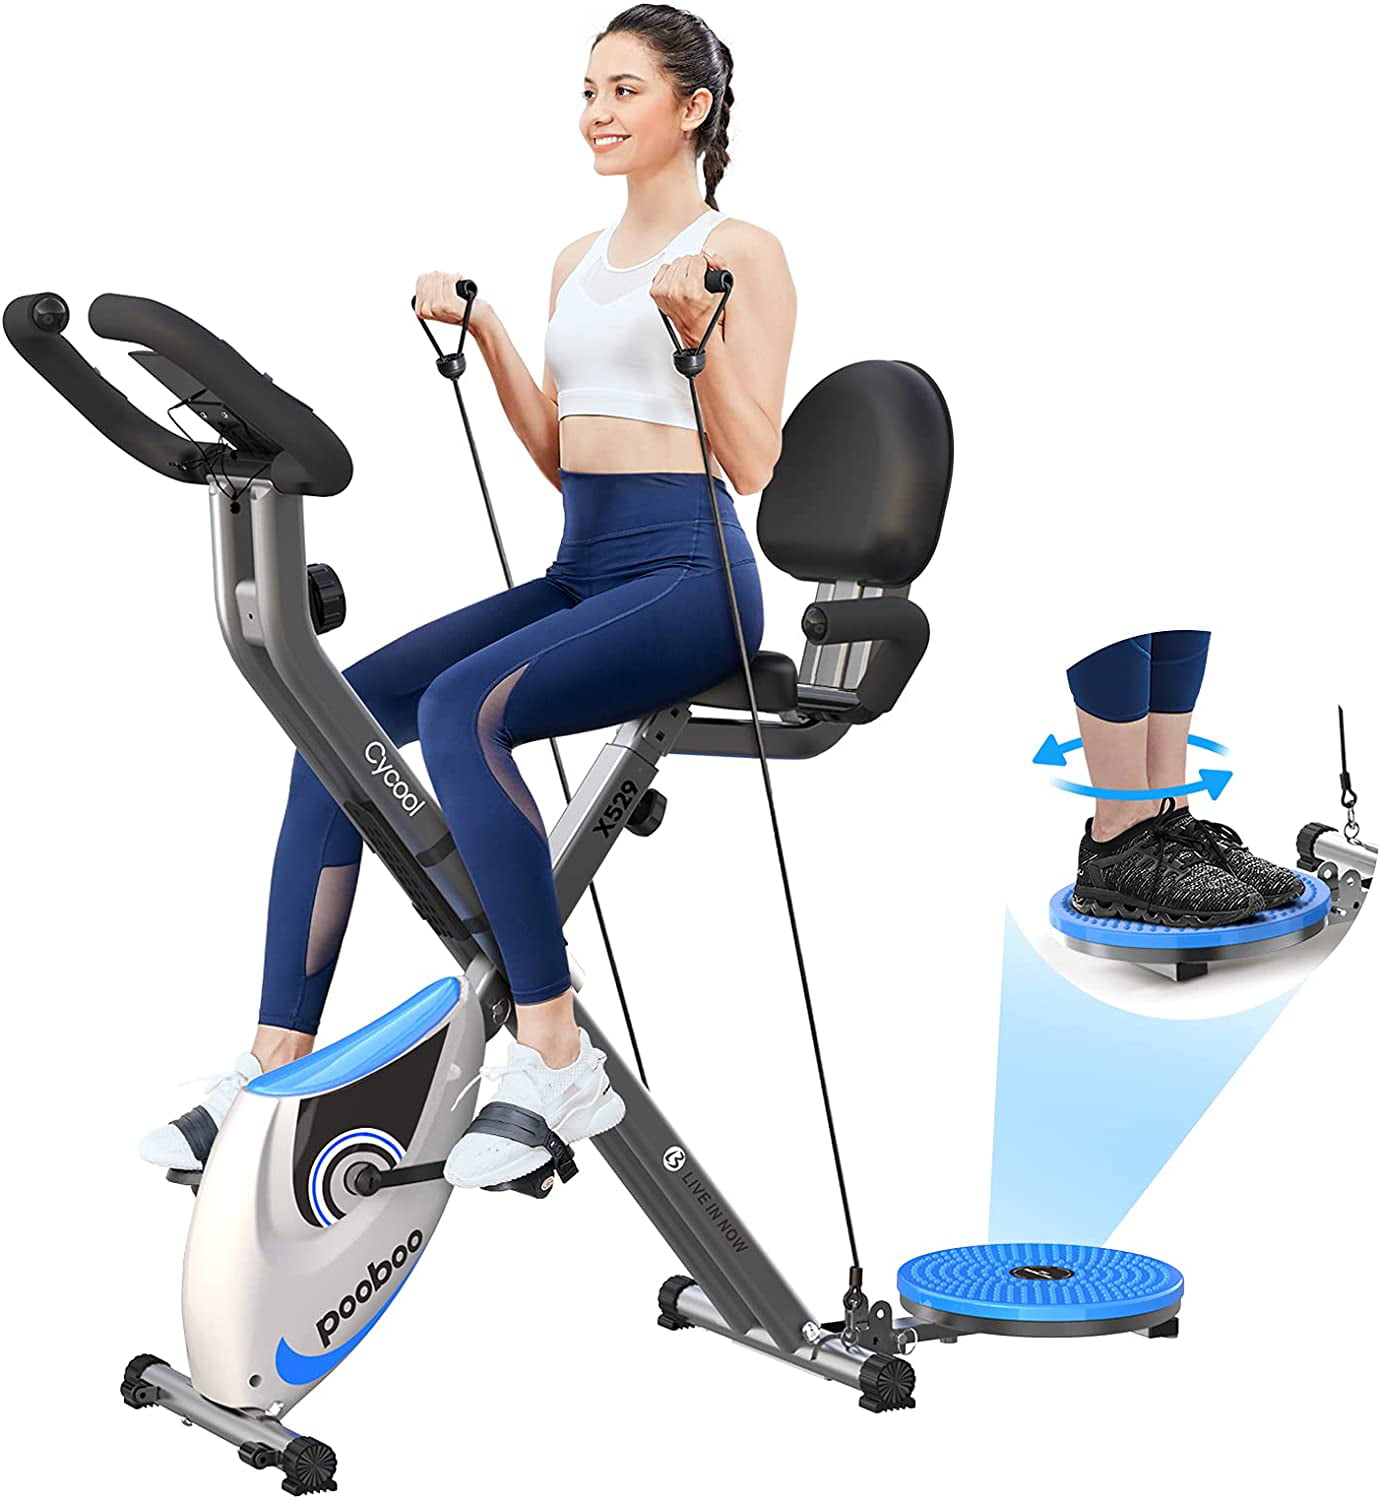 Details about   Doufit Adjustable Resistance Cycling Stationary Recumbent Exercise Bike Indoor 